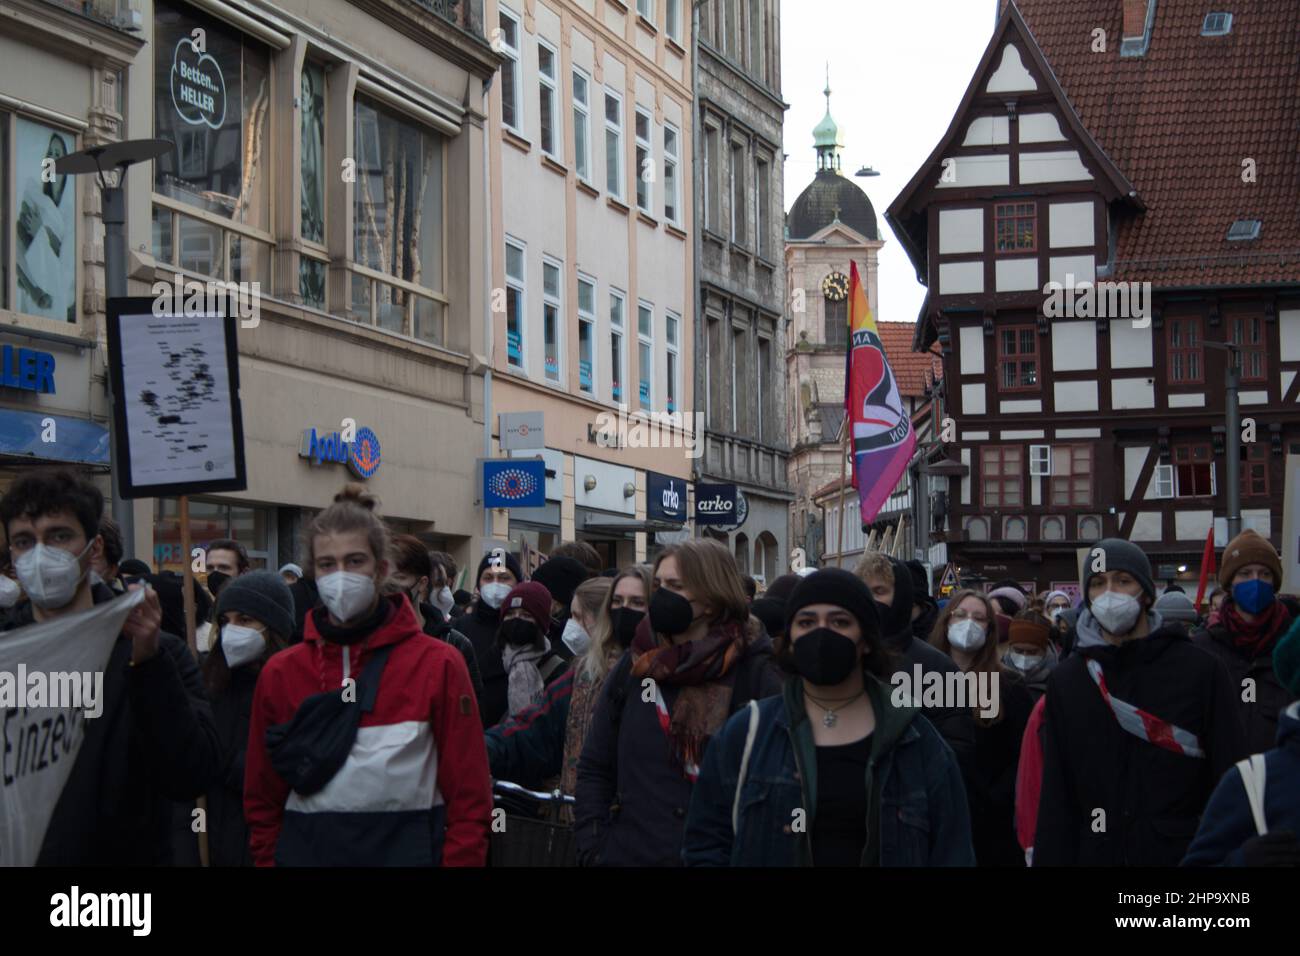 Protests were held across Germany on Saturday. The protesters chanted various slogans against racism. They lit candles and offered flowers in the name of the deceased. Two years ago today, nine people were killed in a racially motivated attack in Hanau. (Photo by Tubal Sapkota/Pacific Press) Credit: Pacific Press Media Production Corp./Alamy Live News Stock Photo